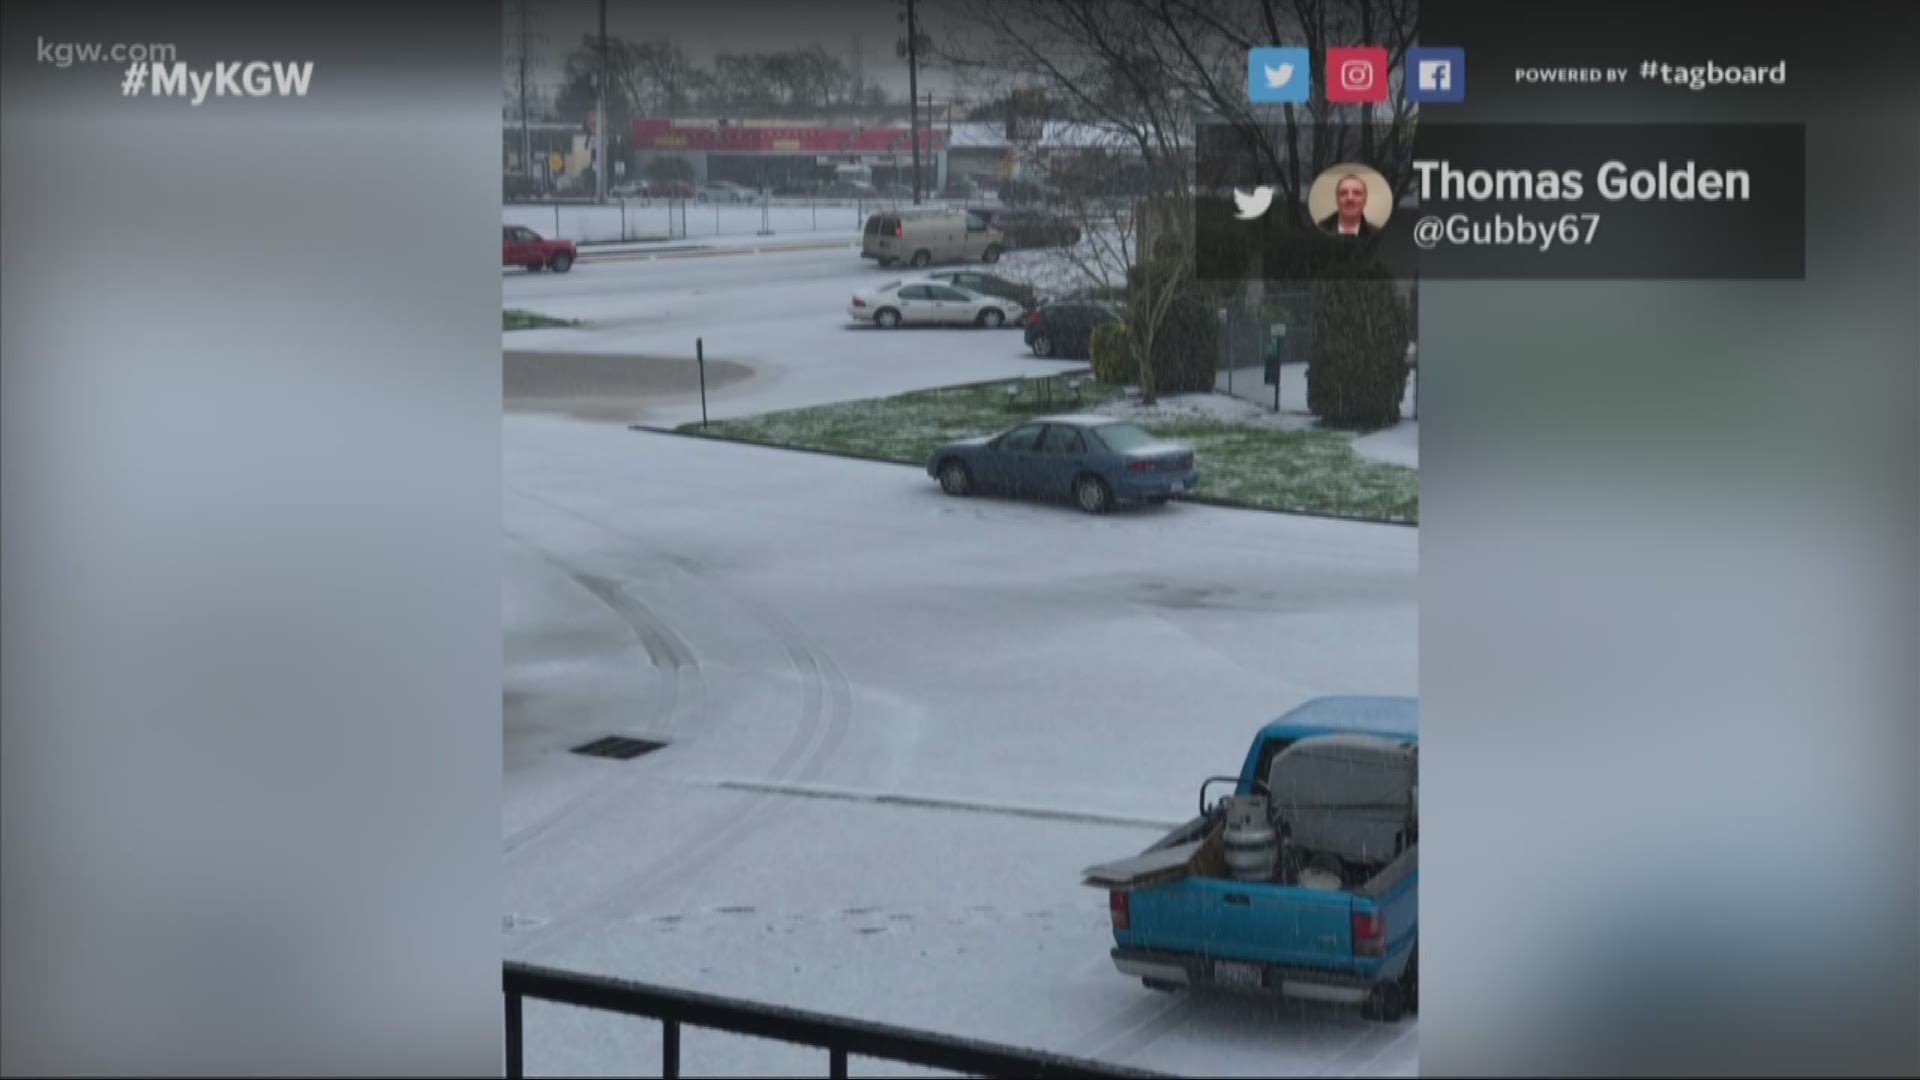 Afternoon hail storm hits metro area